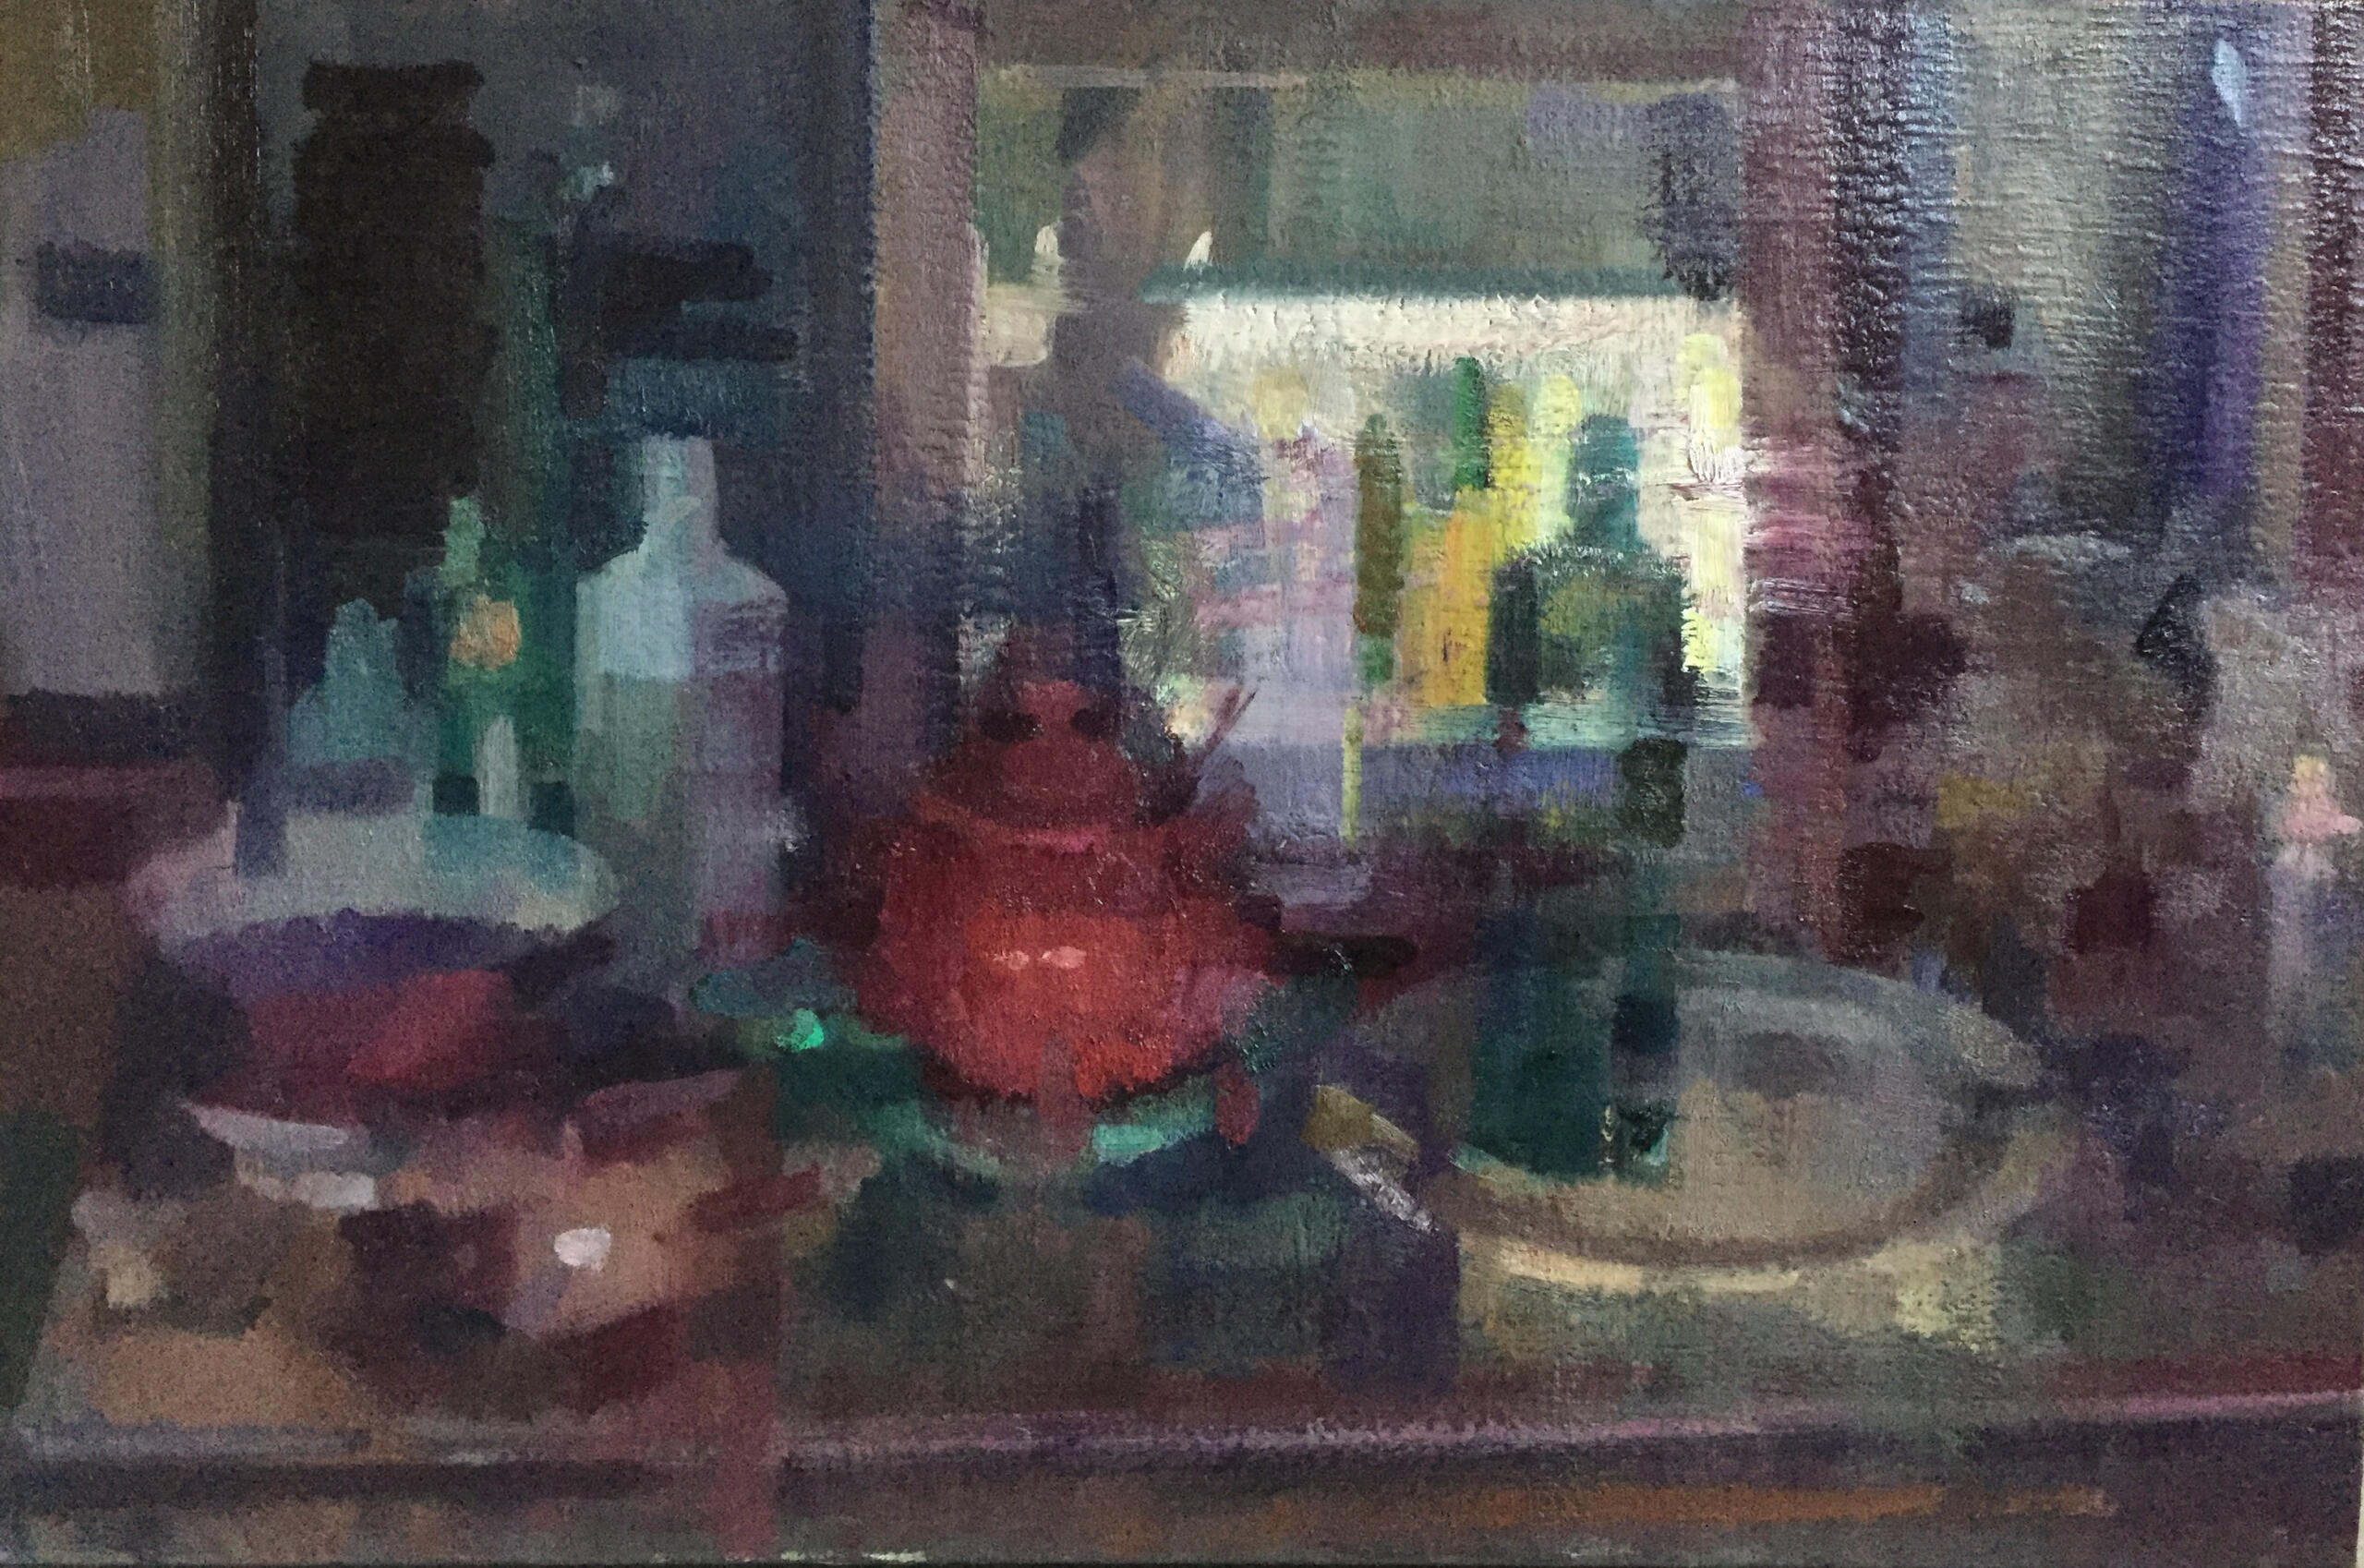 A dark but warm array of items, including a red tea kettle, on a table are painted with wide strokes, giving the sense that we are seeing all the light reflected in the scene without much clarity of borders